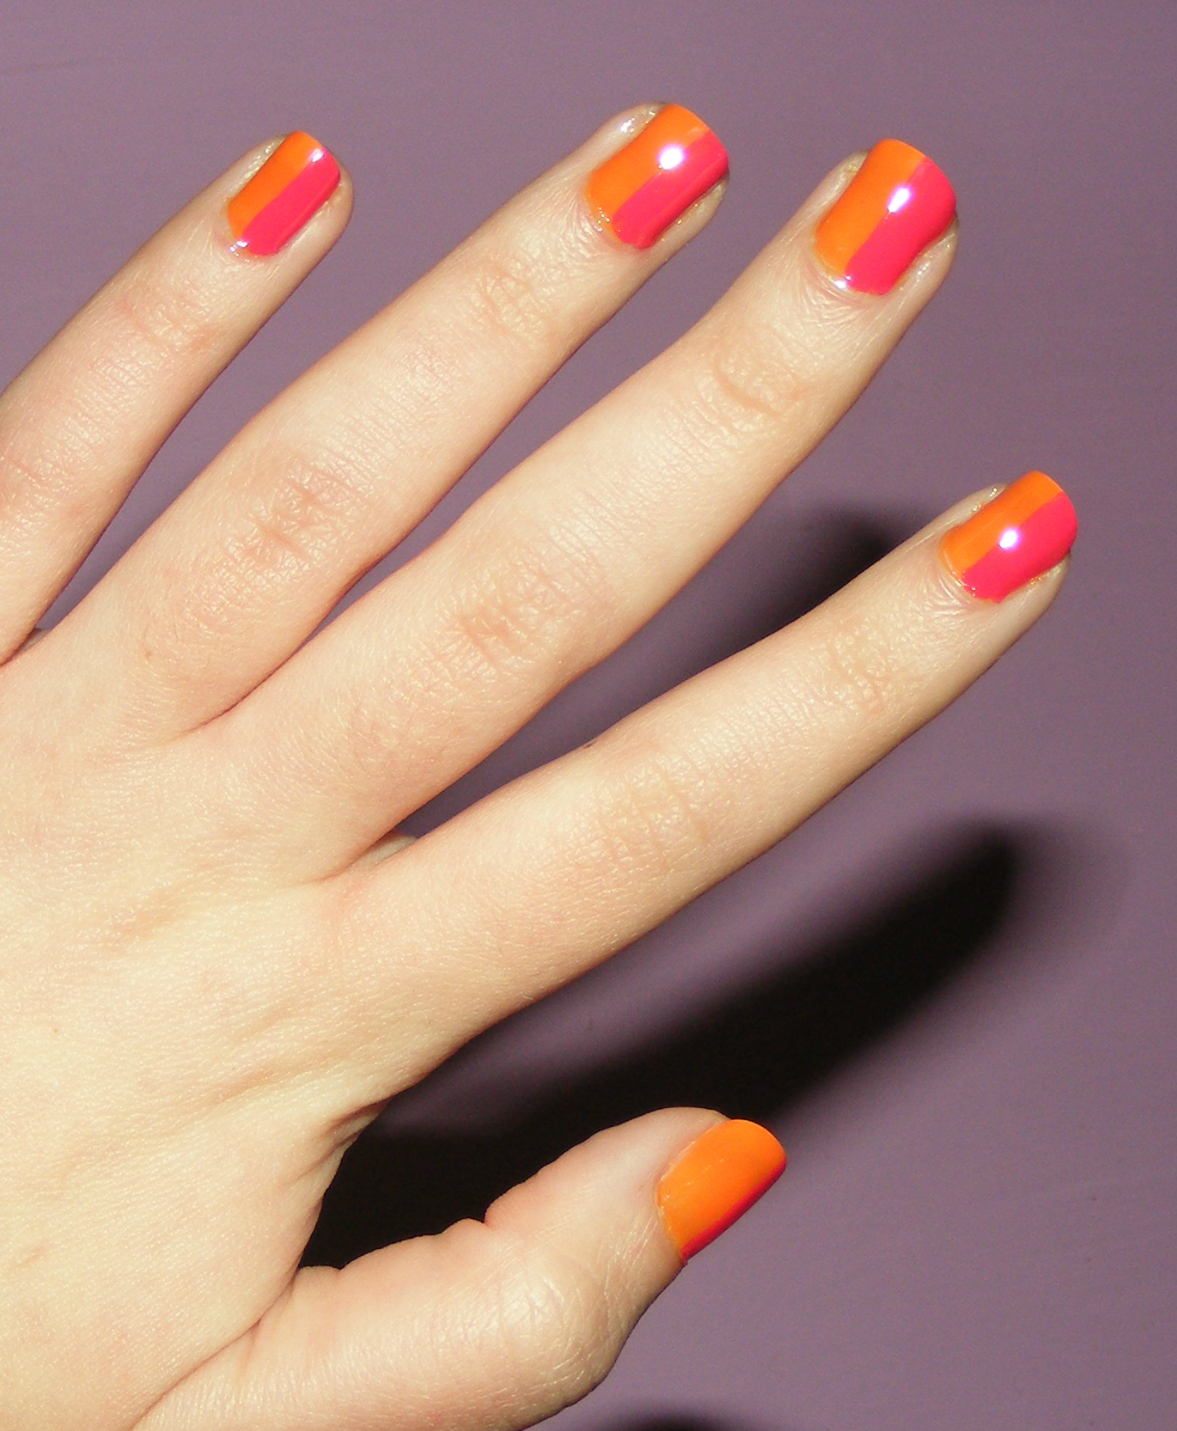 Nails Of The Day (NOTD): Double neon